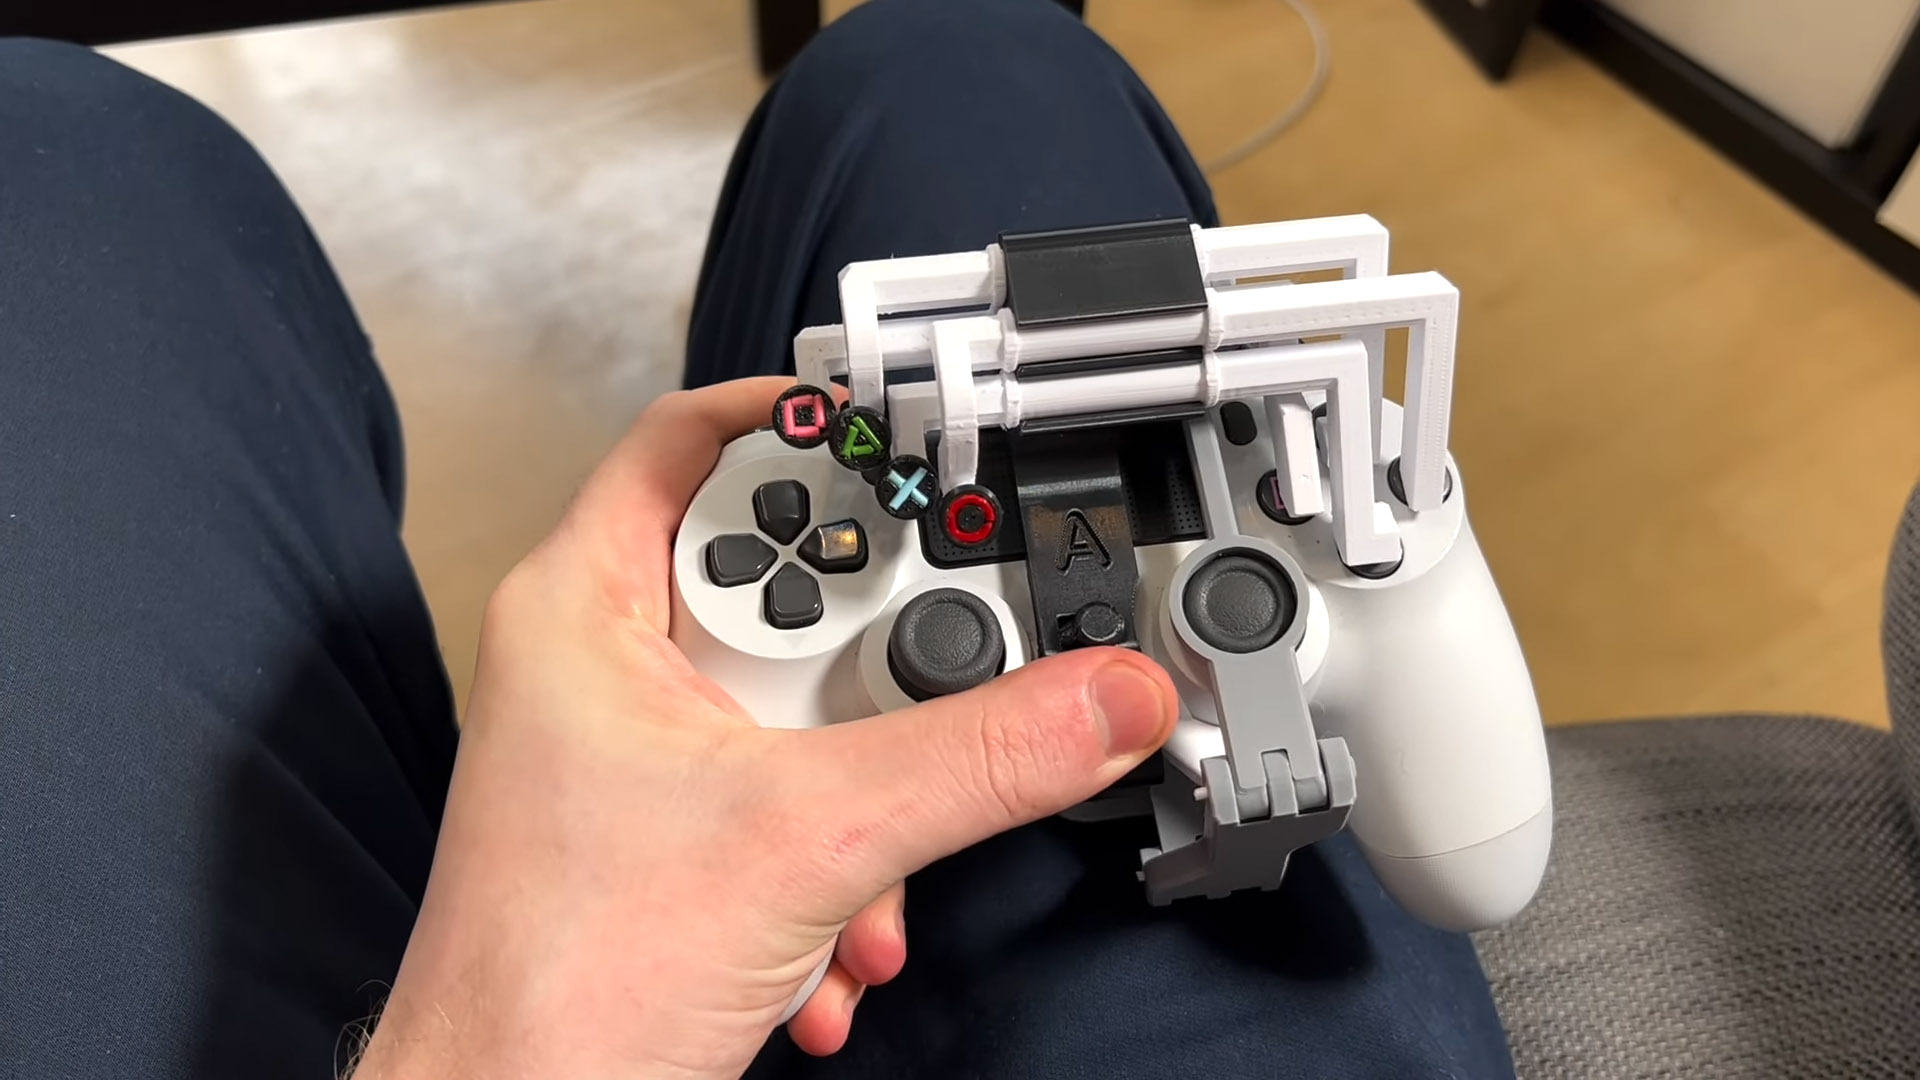 3D-printed PlayStation controller mod allows one-handed PS4 PS5 gaming - NotebookCheck.net News